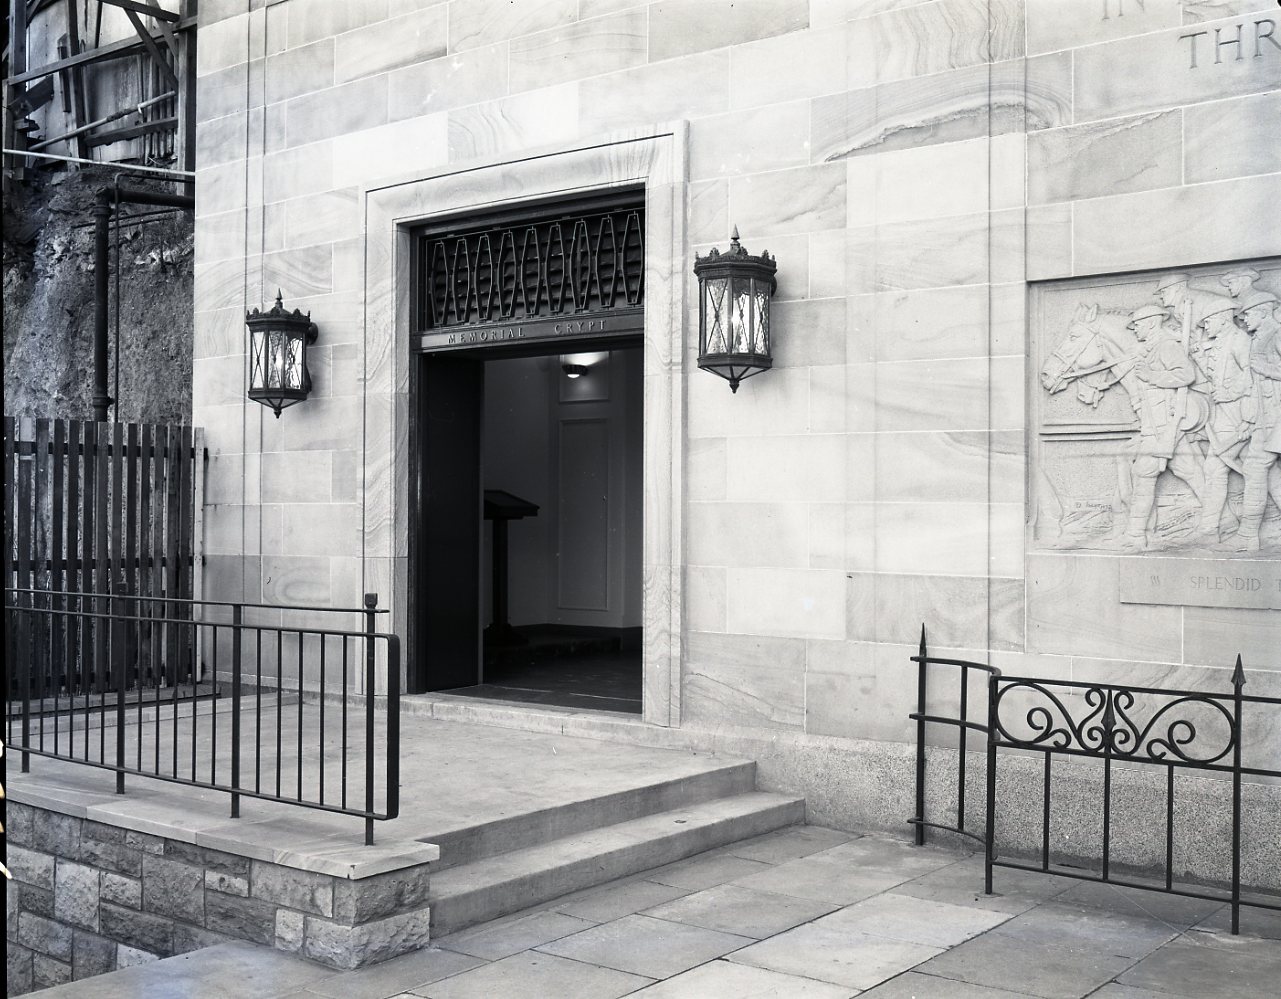 Black and white image taken from outside of the entrance to Anzac Memorial Crypt, showing two steps leading to the doorway and two lights attached to the wall either side of the entrance.